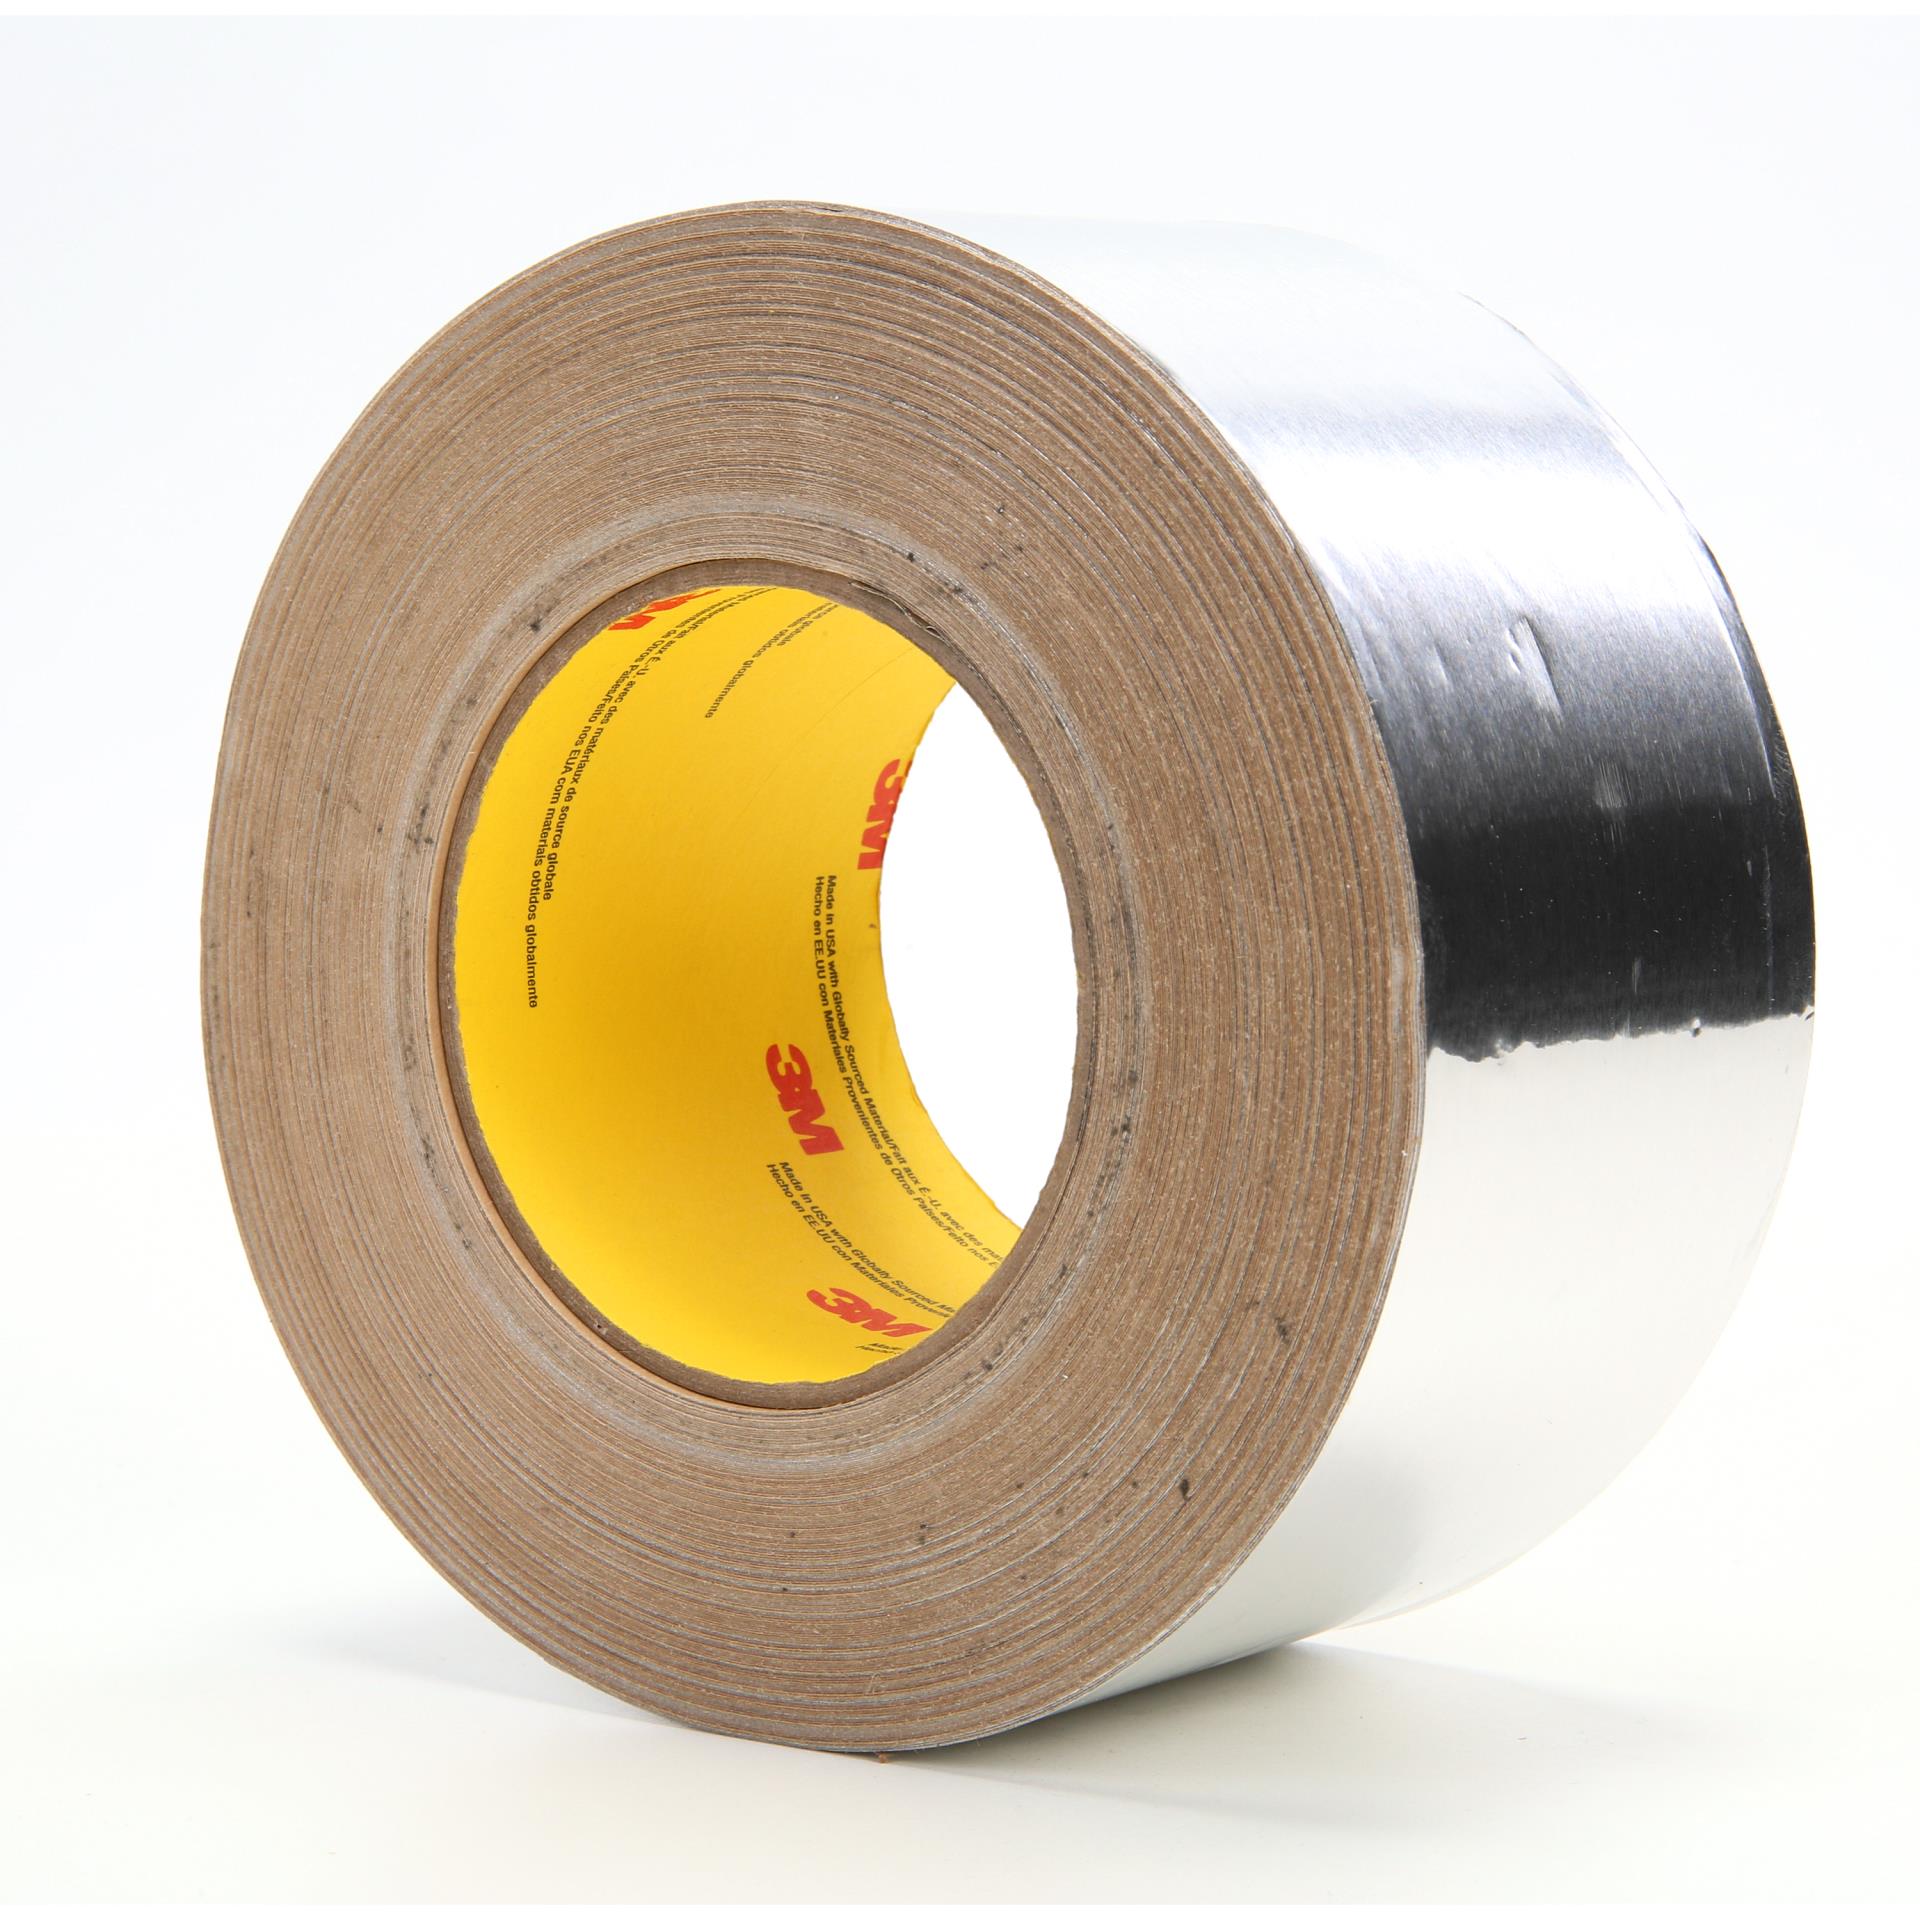 1.7 mil Industrial Grade Aluminum Foil Tape 2 Inches x 150 Ft Self Adhesive 